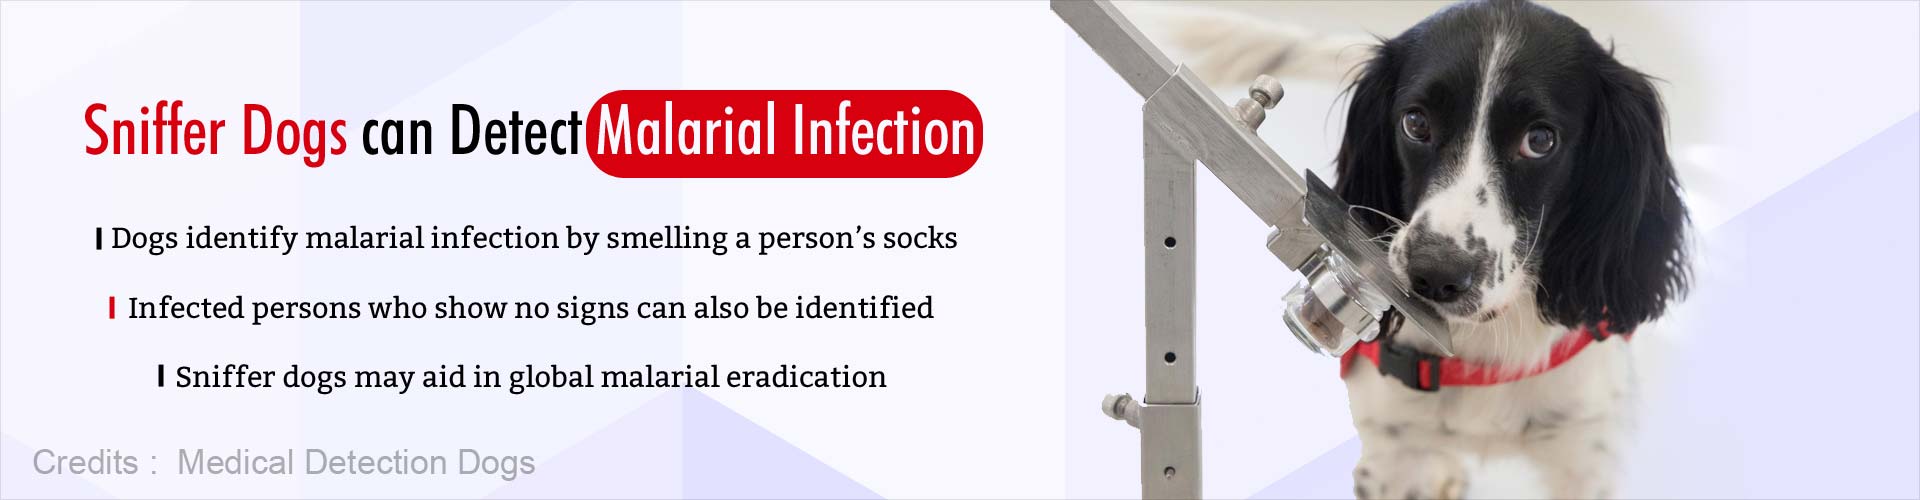 Sniffer dogs can detect malarial infection. Dogs identify malarial infection by smelling a person''s socks. Infected persons who show no signs can also be identified. Sniffer dogs may aid in global malarial eradication.